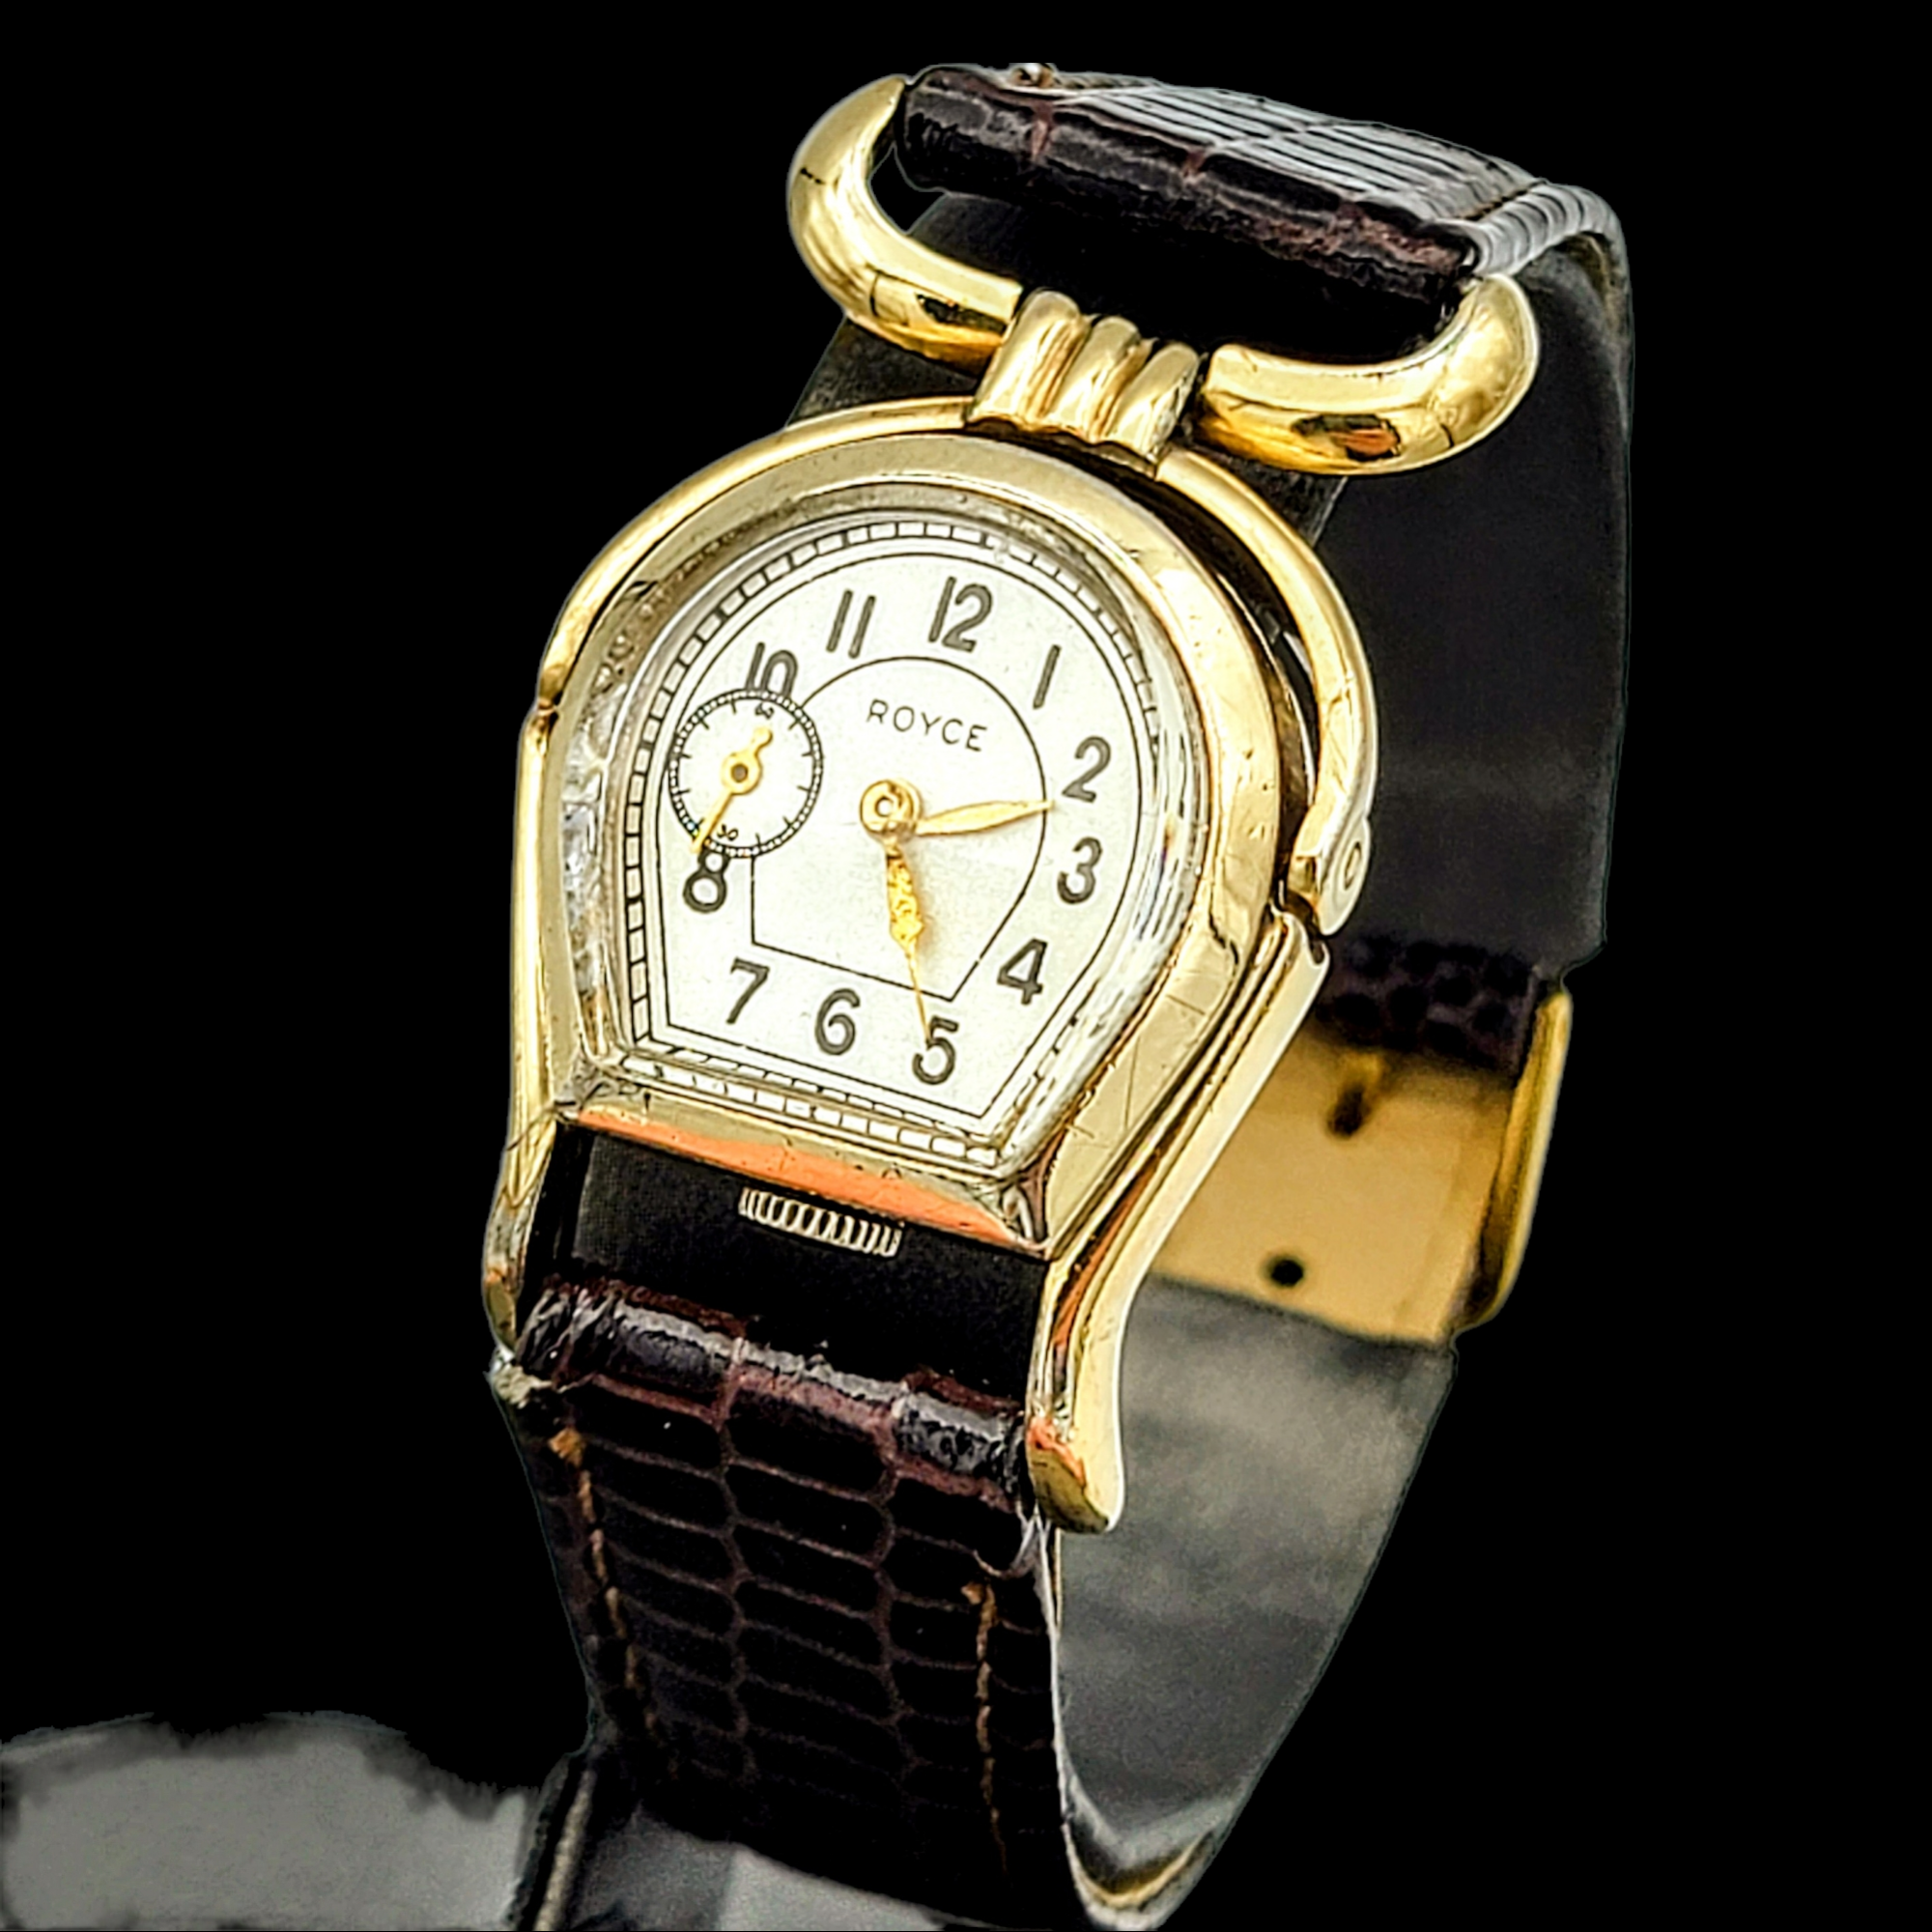 Fake Lady Omega Specialities Rose Gold Horseshoe-shaped Diamonds Case Blue  Dial Two Rose Gold Hands Black Patent Leather Strap Watch 5885.72.51